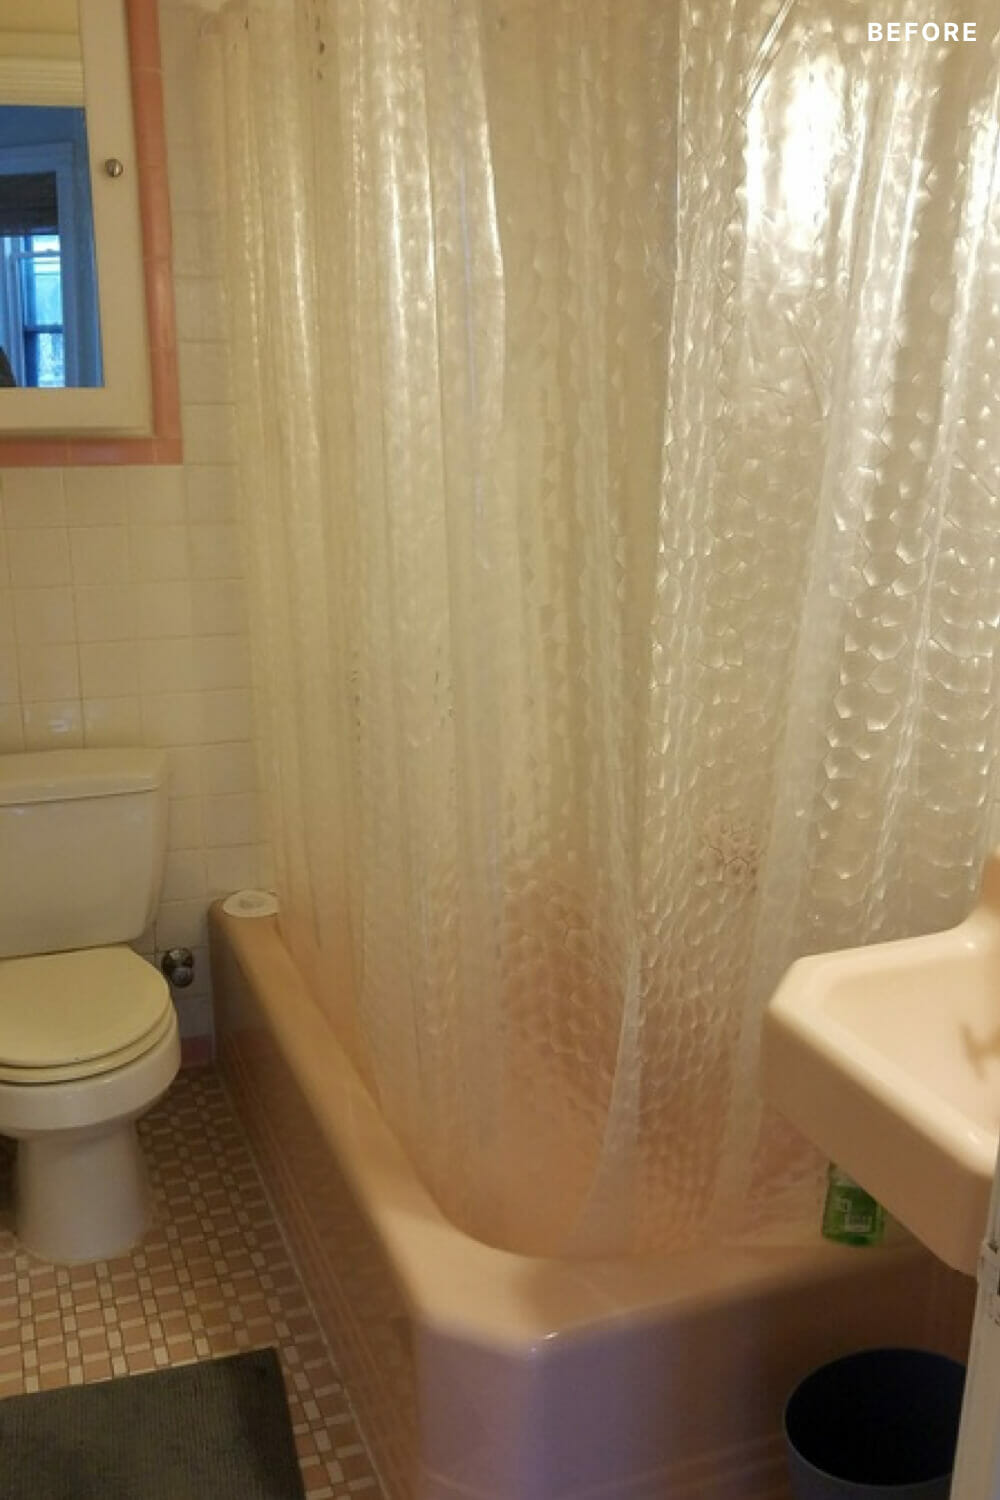 white shower curtain over a pink bathtub and small bathroom with white toilet before renovation